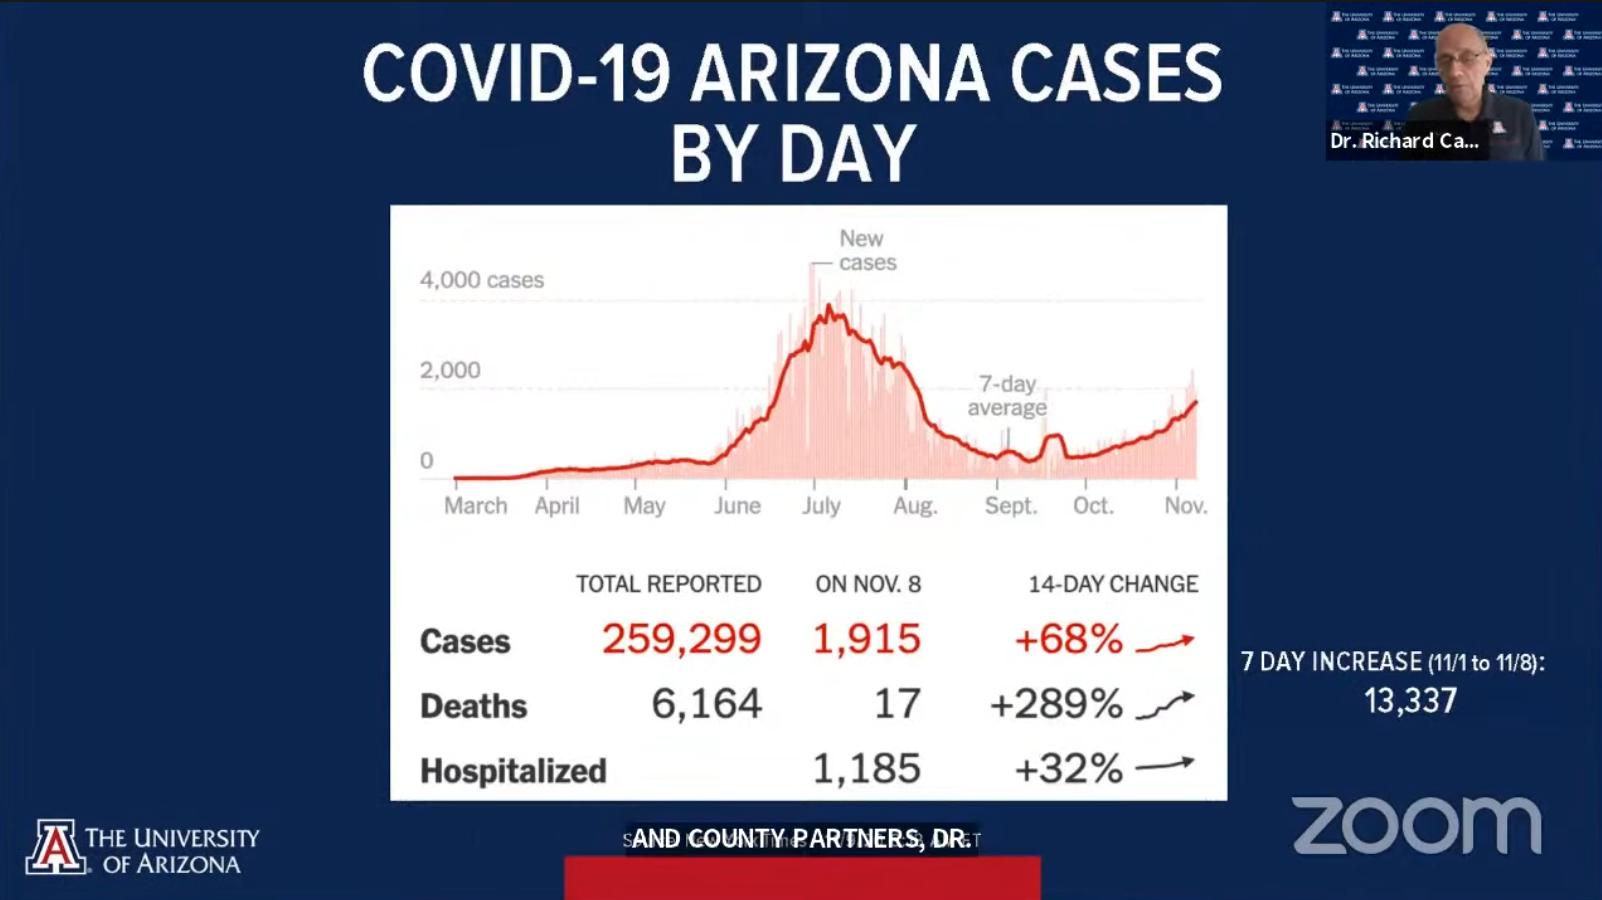 Screenshot of Task force Director Dr. Richard Carmona, who discussed Arizona's steady increase in COVID-19 cases in the past few weeks.